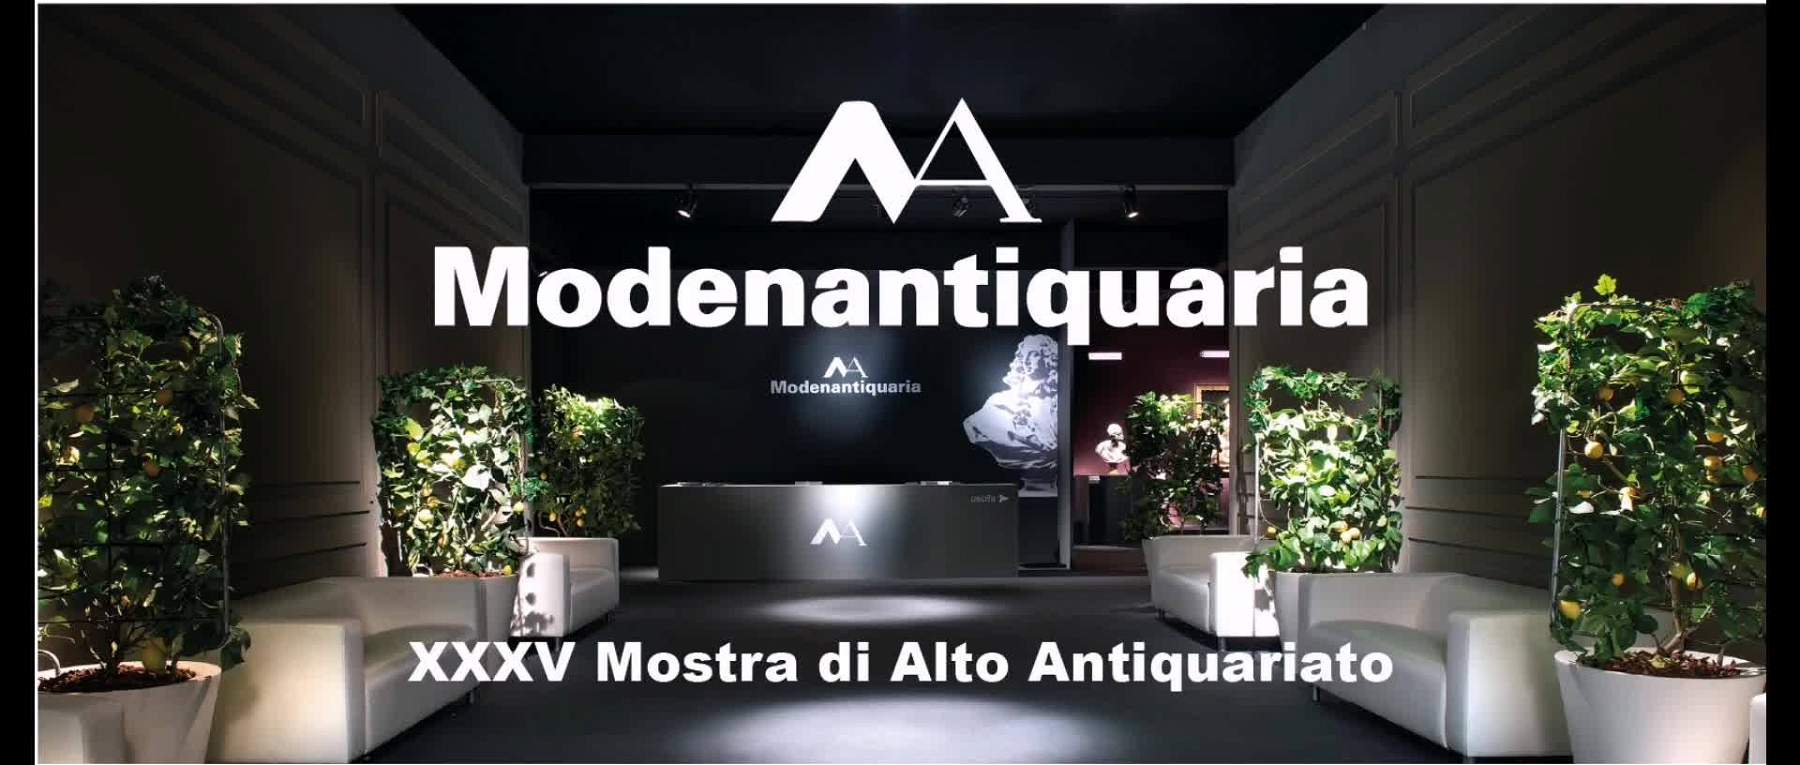 Coming up is the XXXV edition of Modenantiquaria, an event dedicated to high antiques 